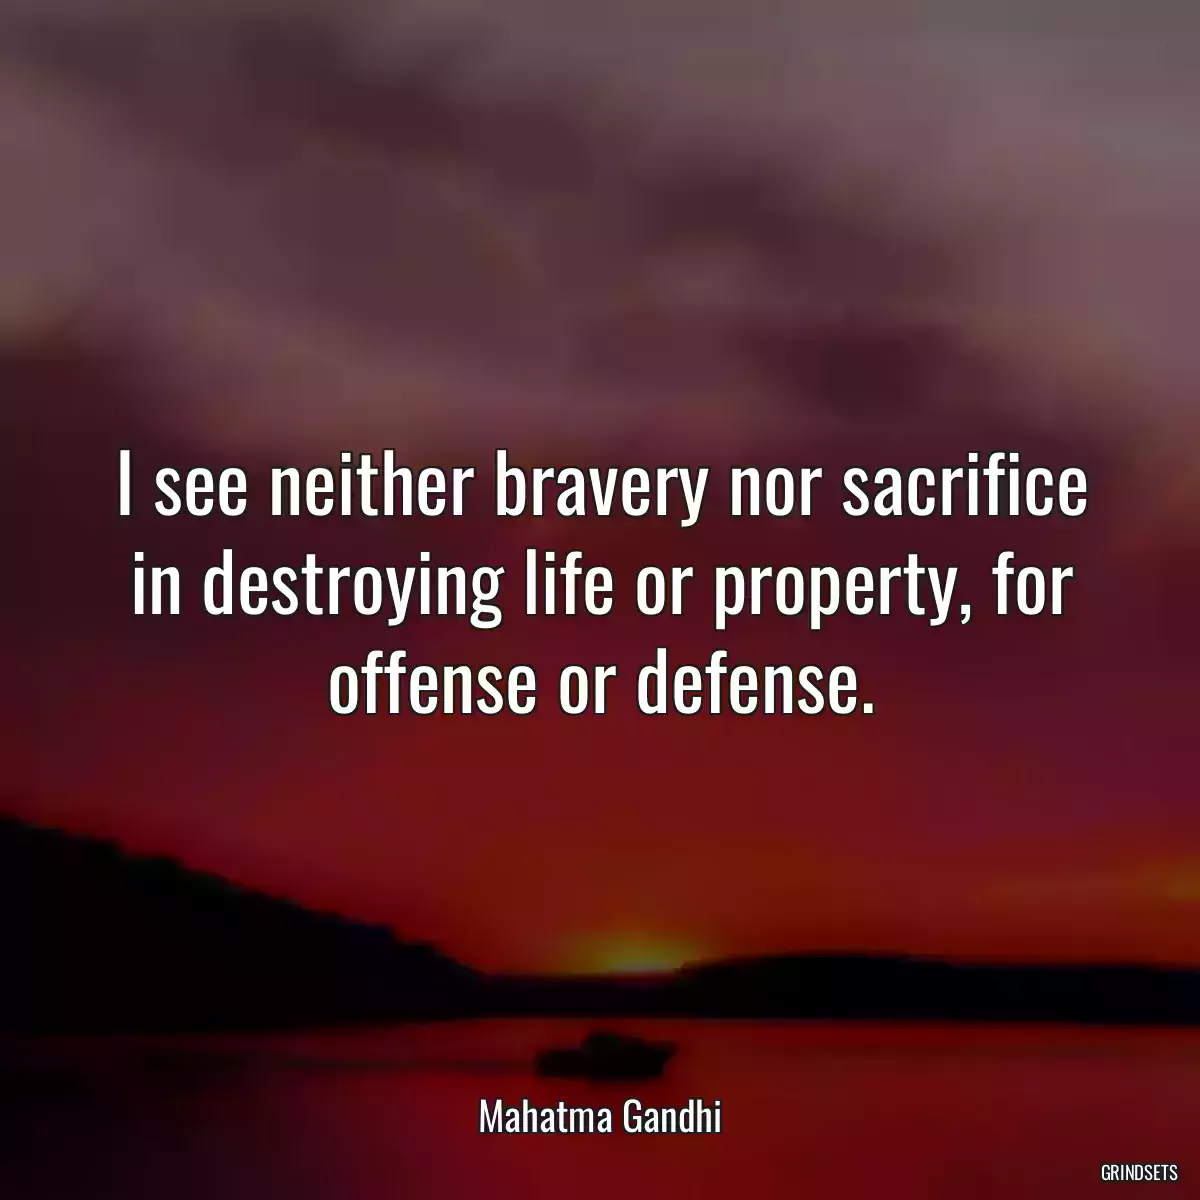 I see neither bravery nor sacrifice in destroying life or property, for offense or defense.